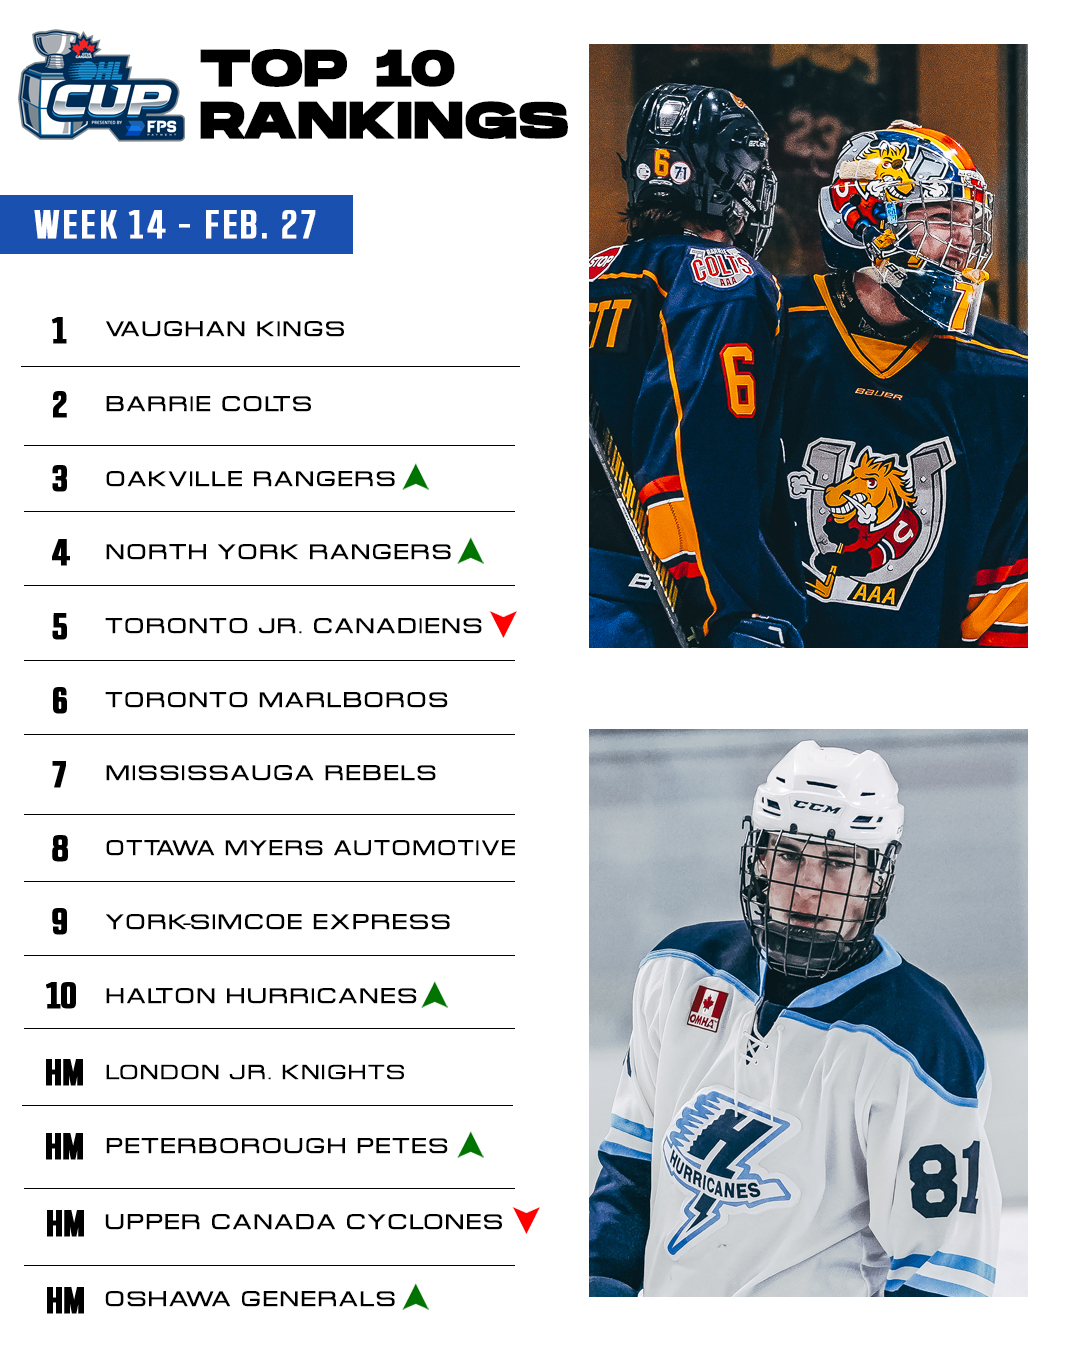 OHL Cup Presented by FPS Payment U16 AAA Top 10 Rankings – Week 3 (Dec. 5,  2023) – OHL Cup